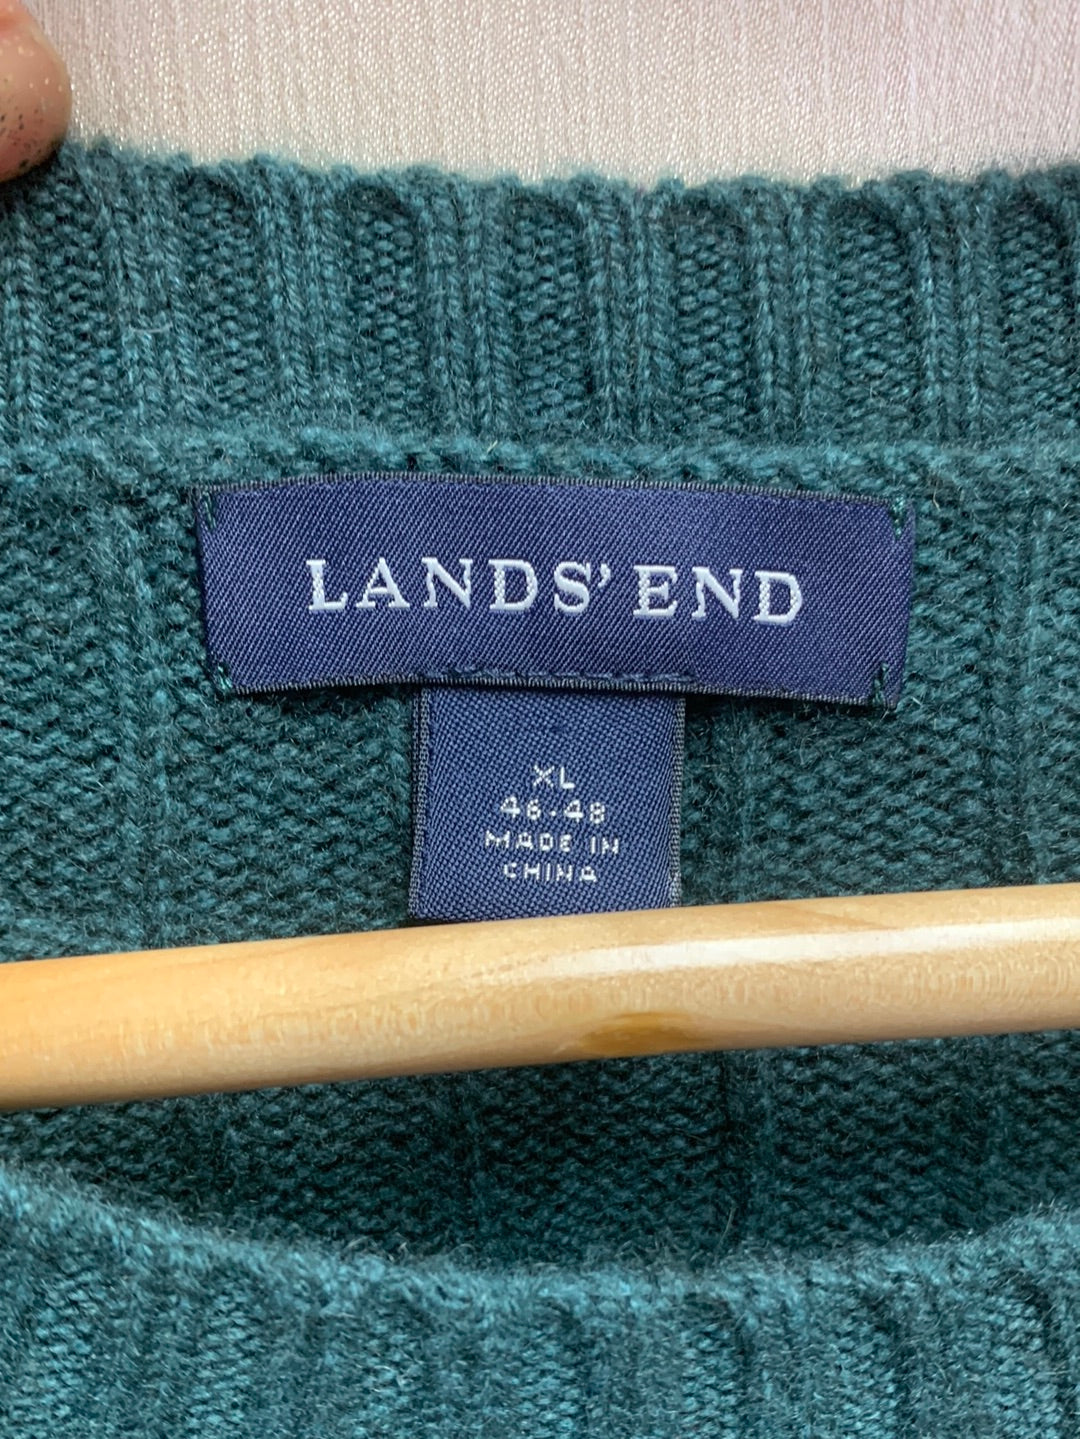 LANDS' END forest green 100% Cashmere Cable Knit Sweater - XL | 46-48